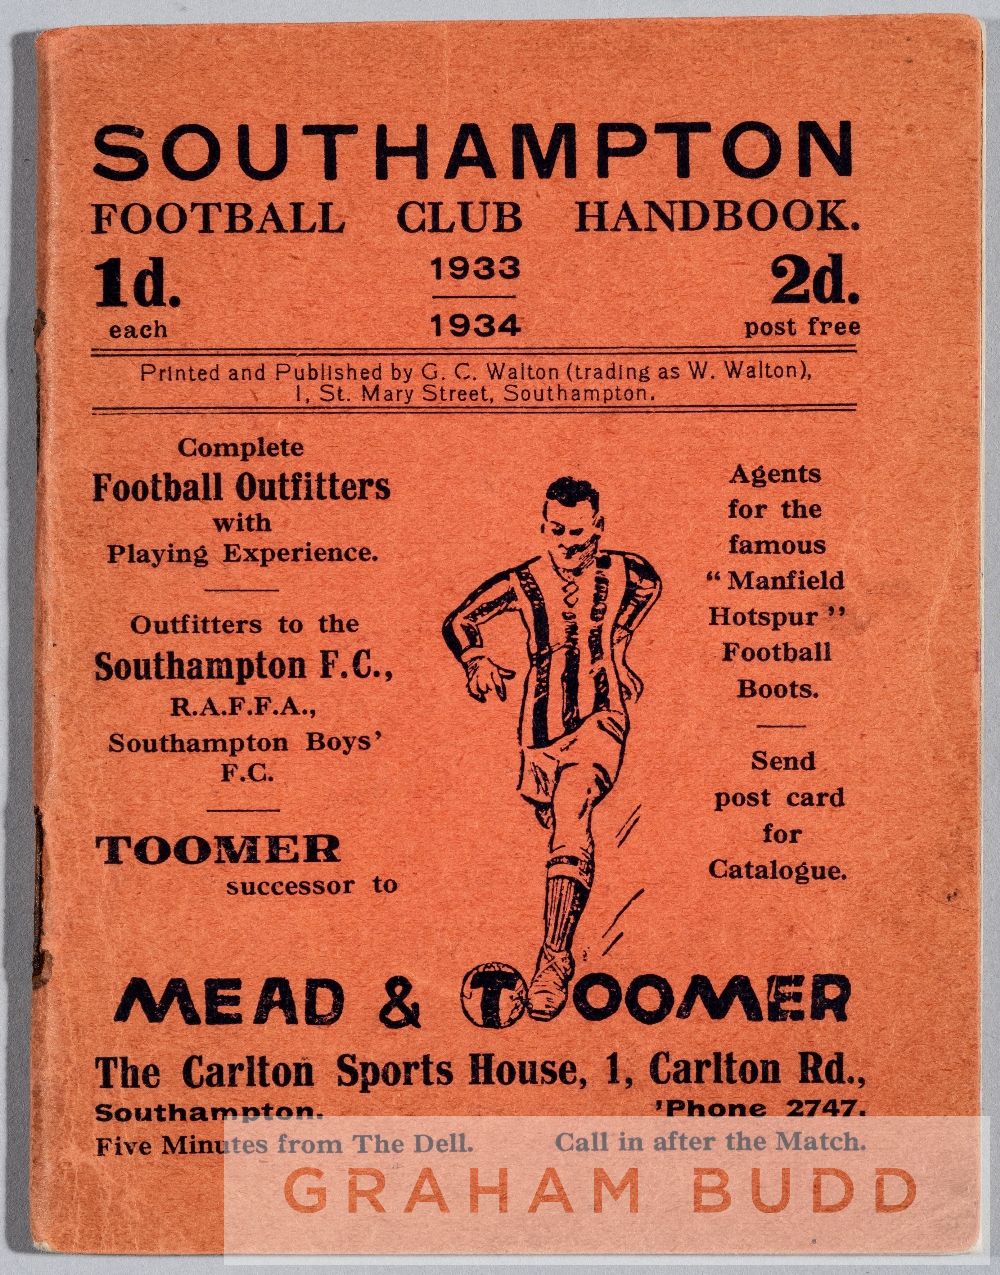 Southampton FC official handbook, season 1933-34, 82-page booklet with orange cover printed in